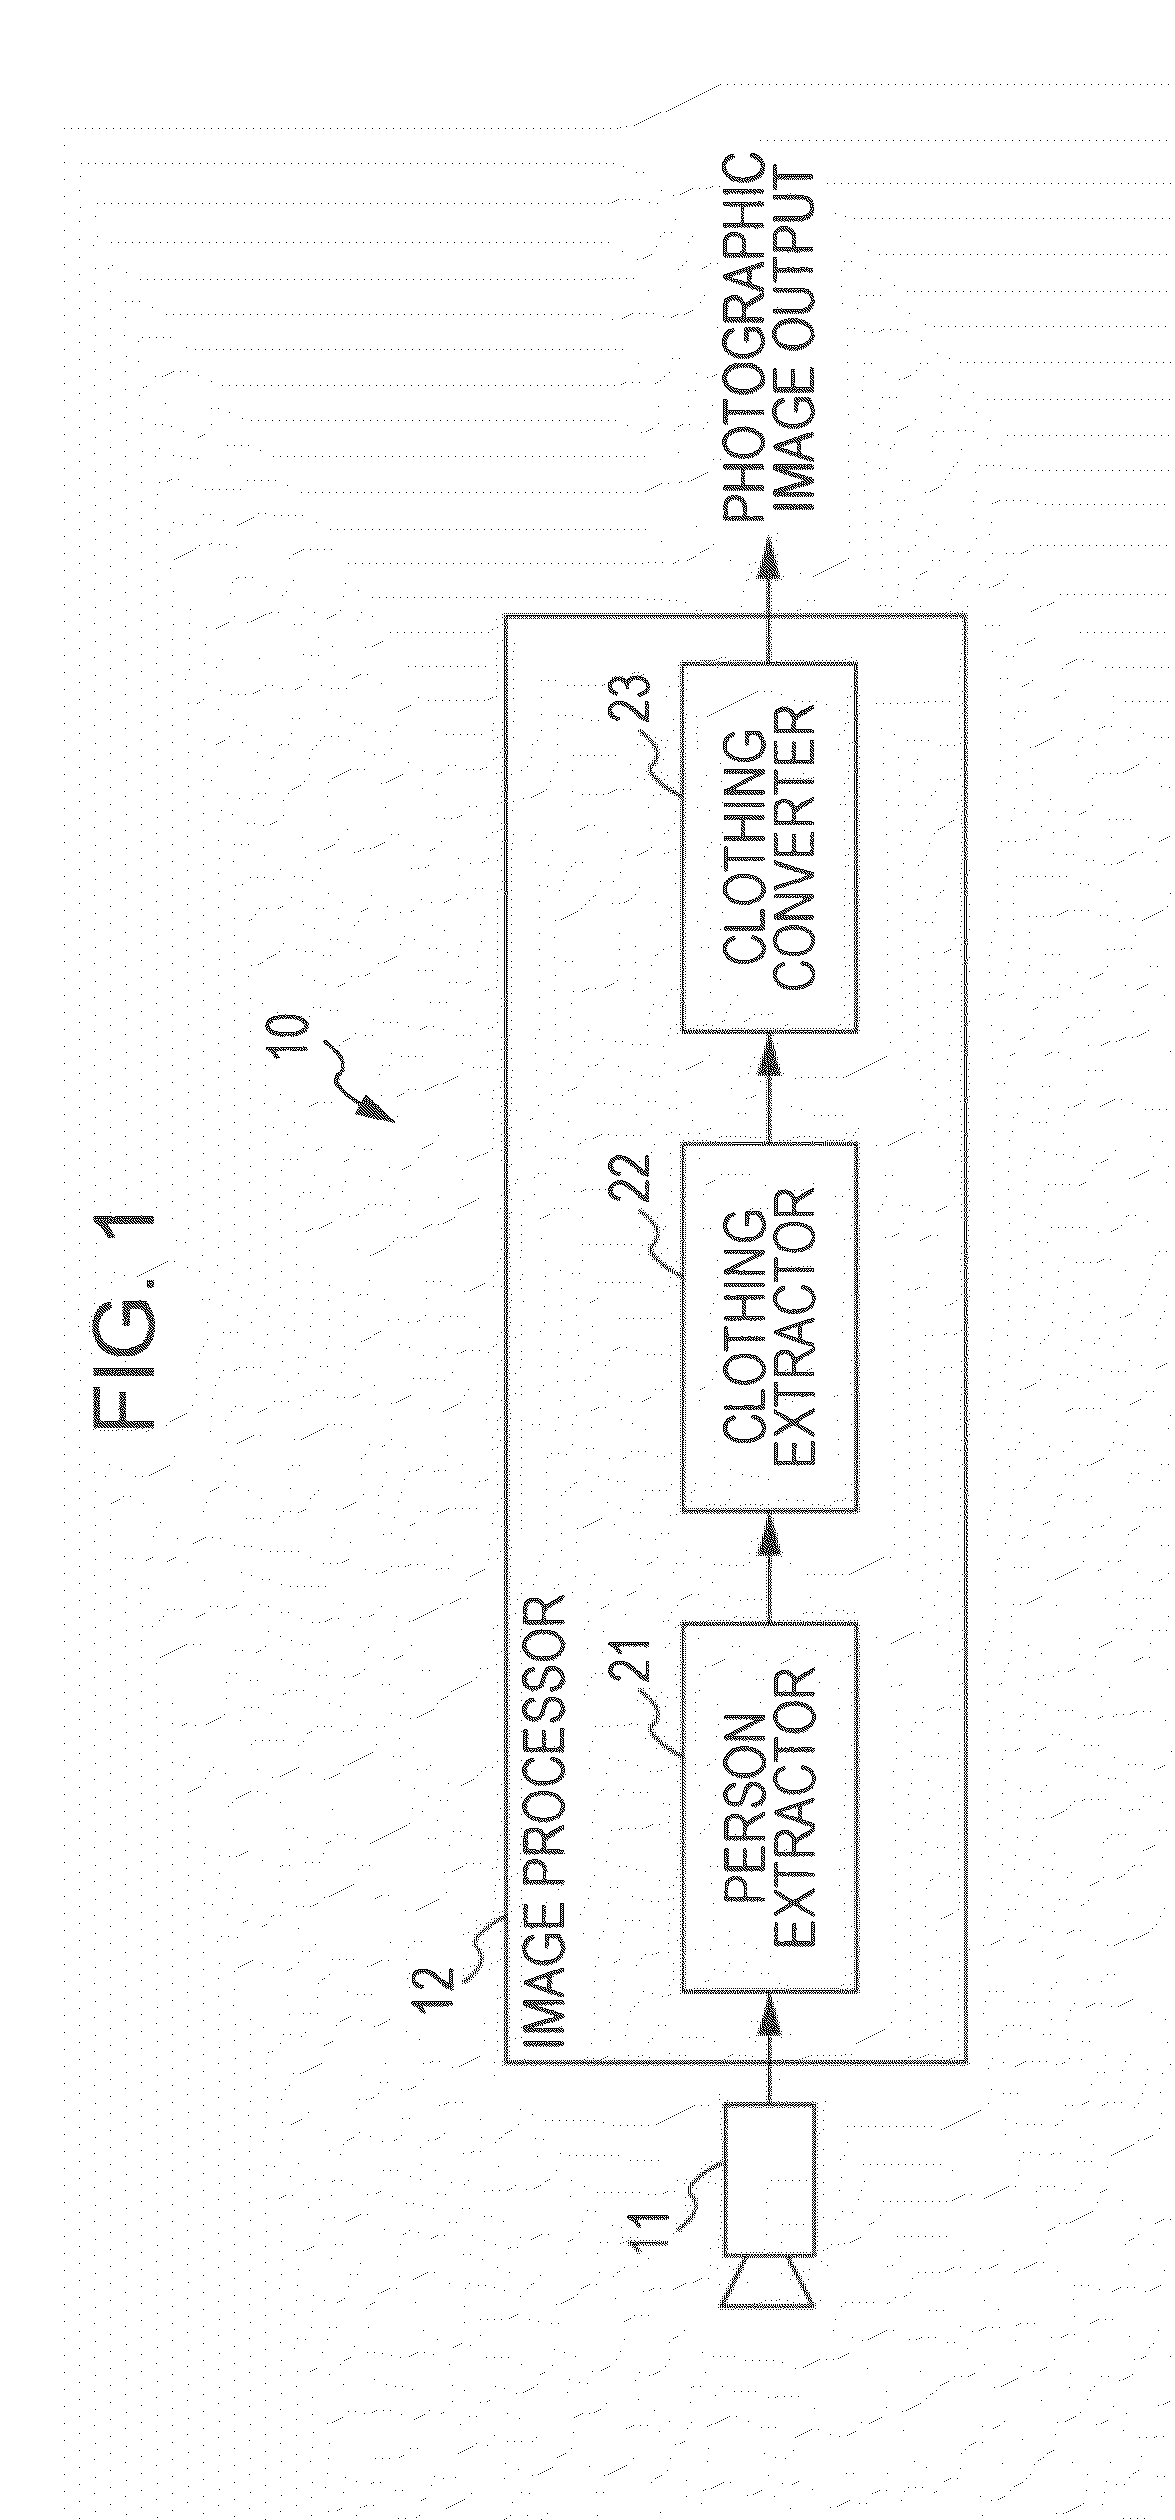 Image processing device for detecting a face or head region, a clothing region and for changing the clothing region